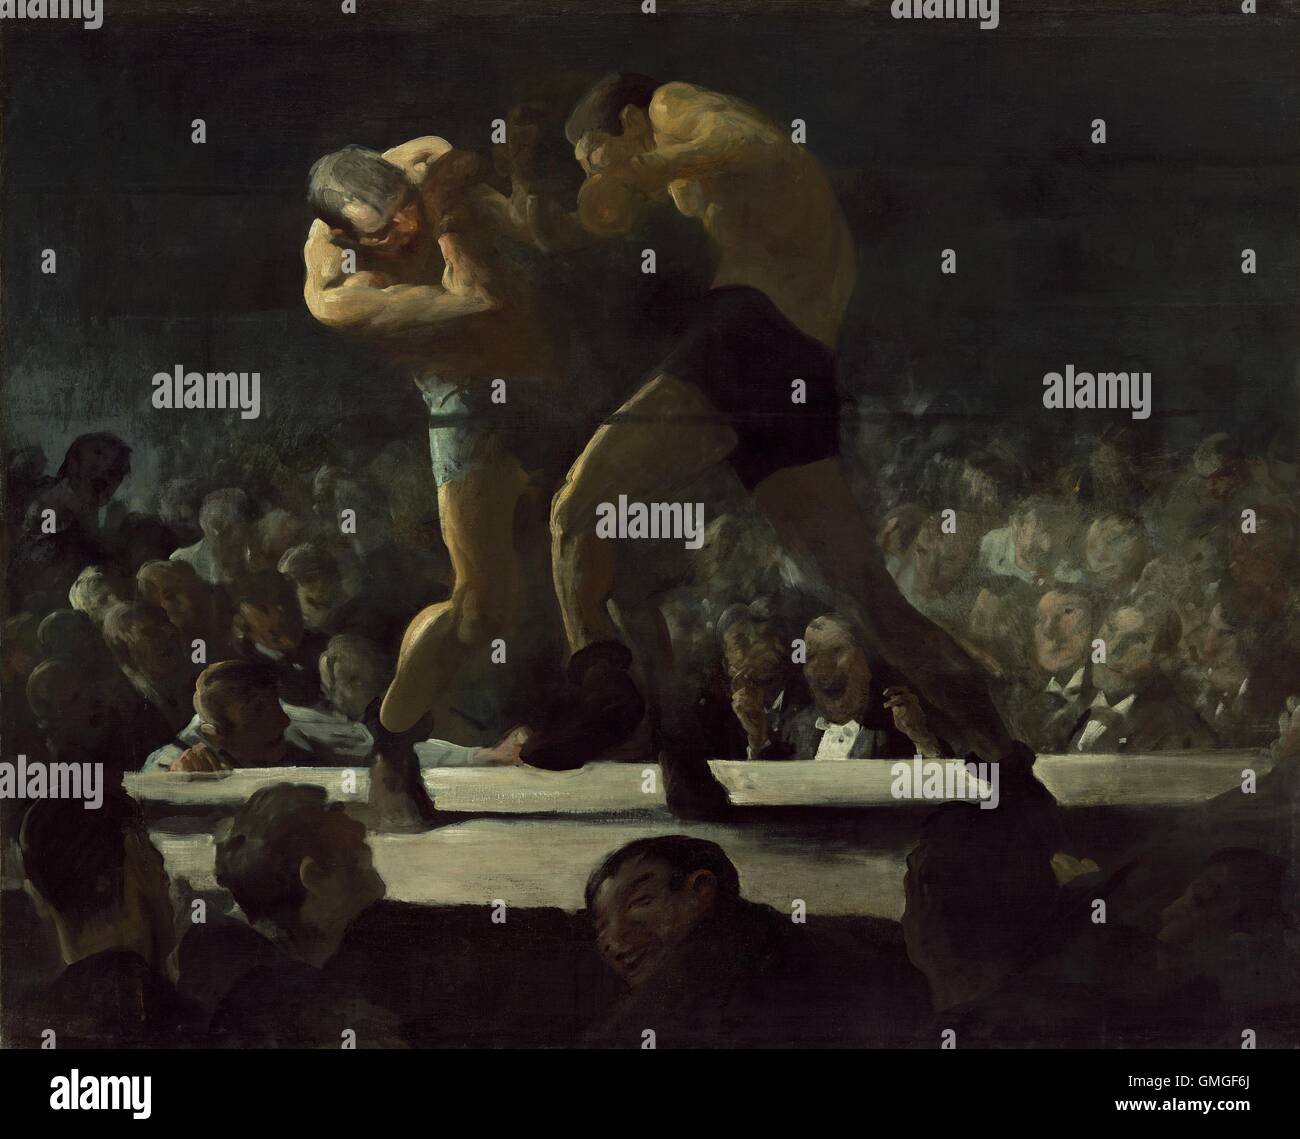 Club Night, by George Bellows, 1907, American painting, oil on canvas. Bellows' enhanced the realism of the boxing match by the Stock Photo